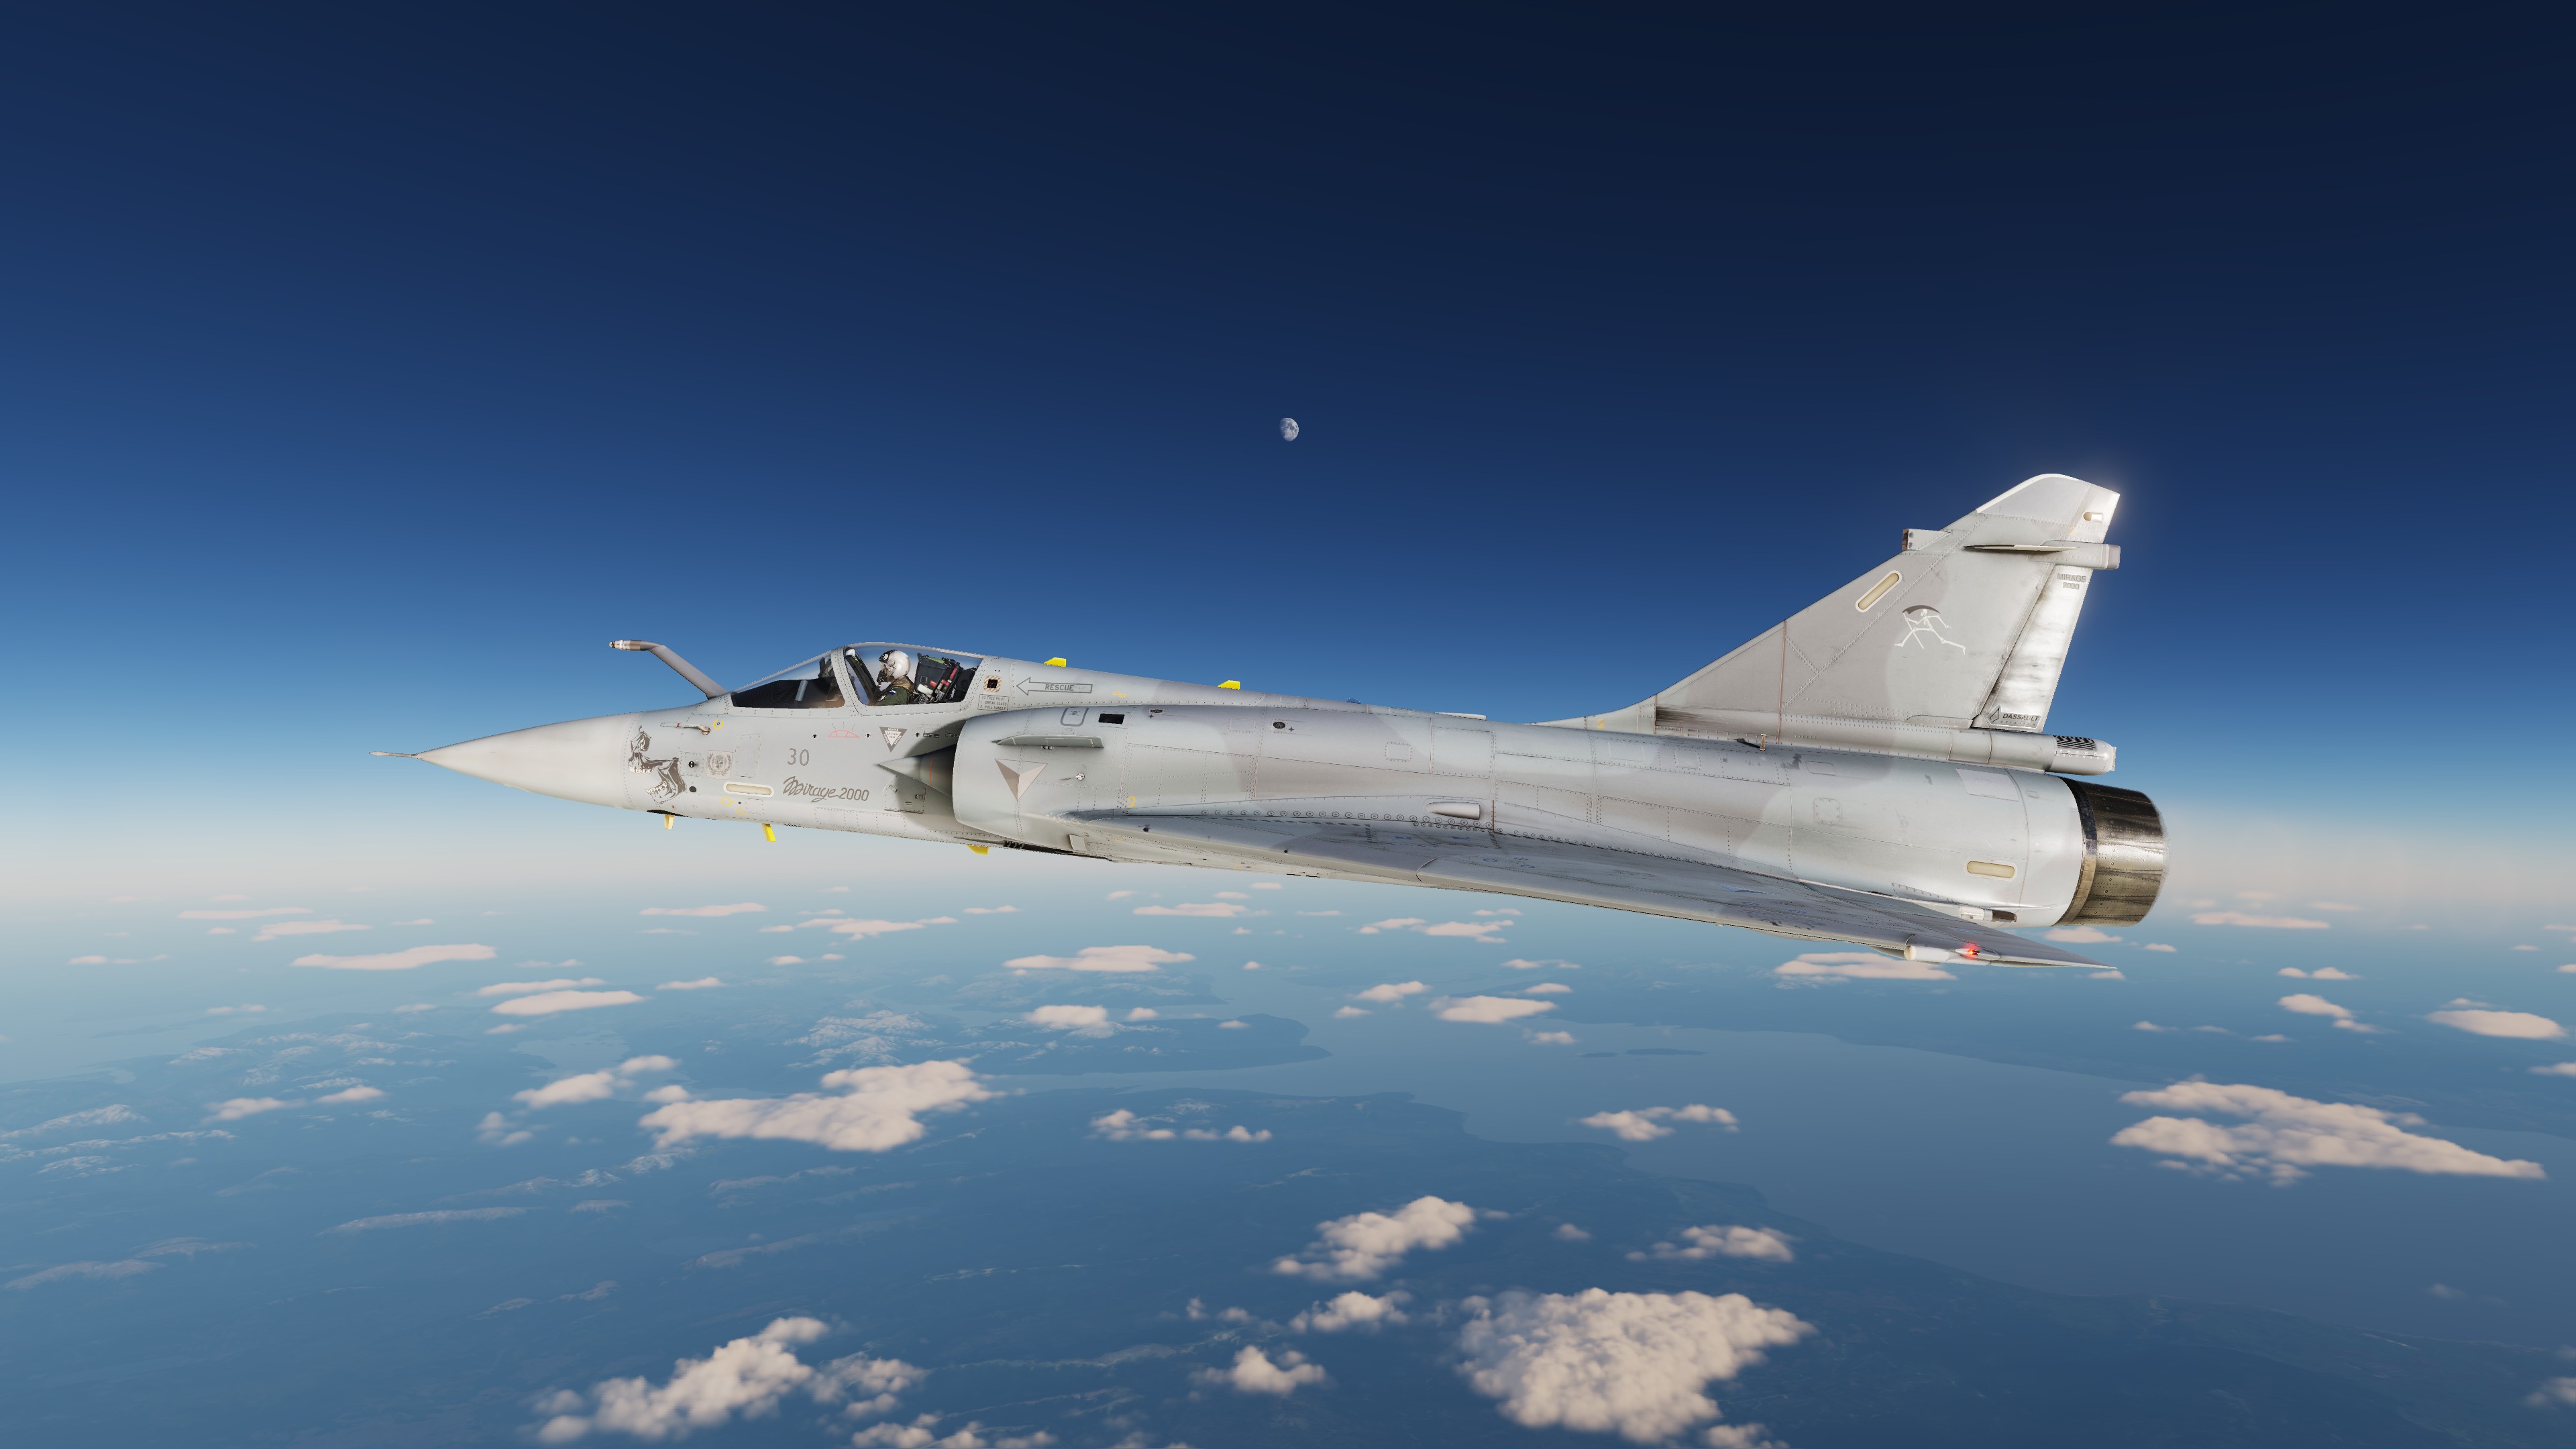 ACE COMBAT - M2000C - Nordennavic Royal Air Force V3 - Sqn "Cote d'Or" SPA94